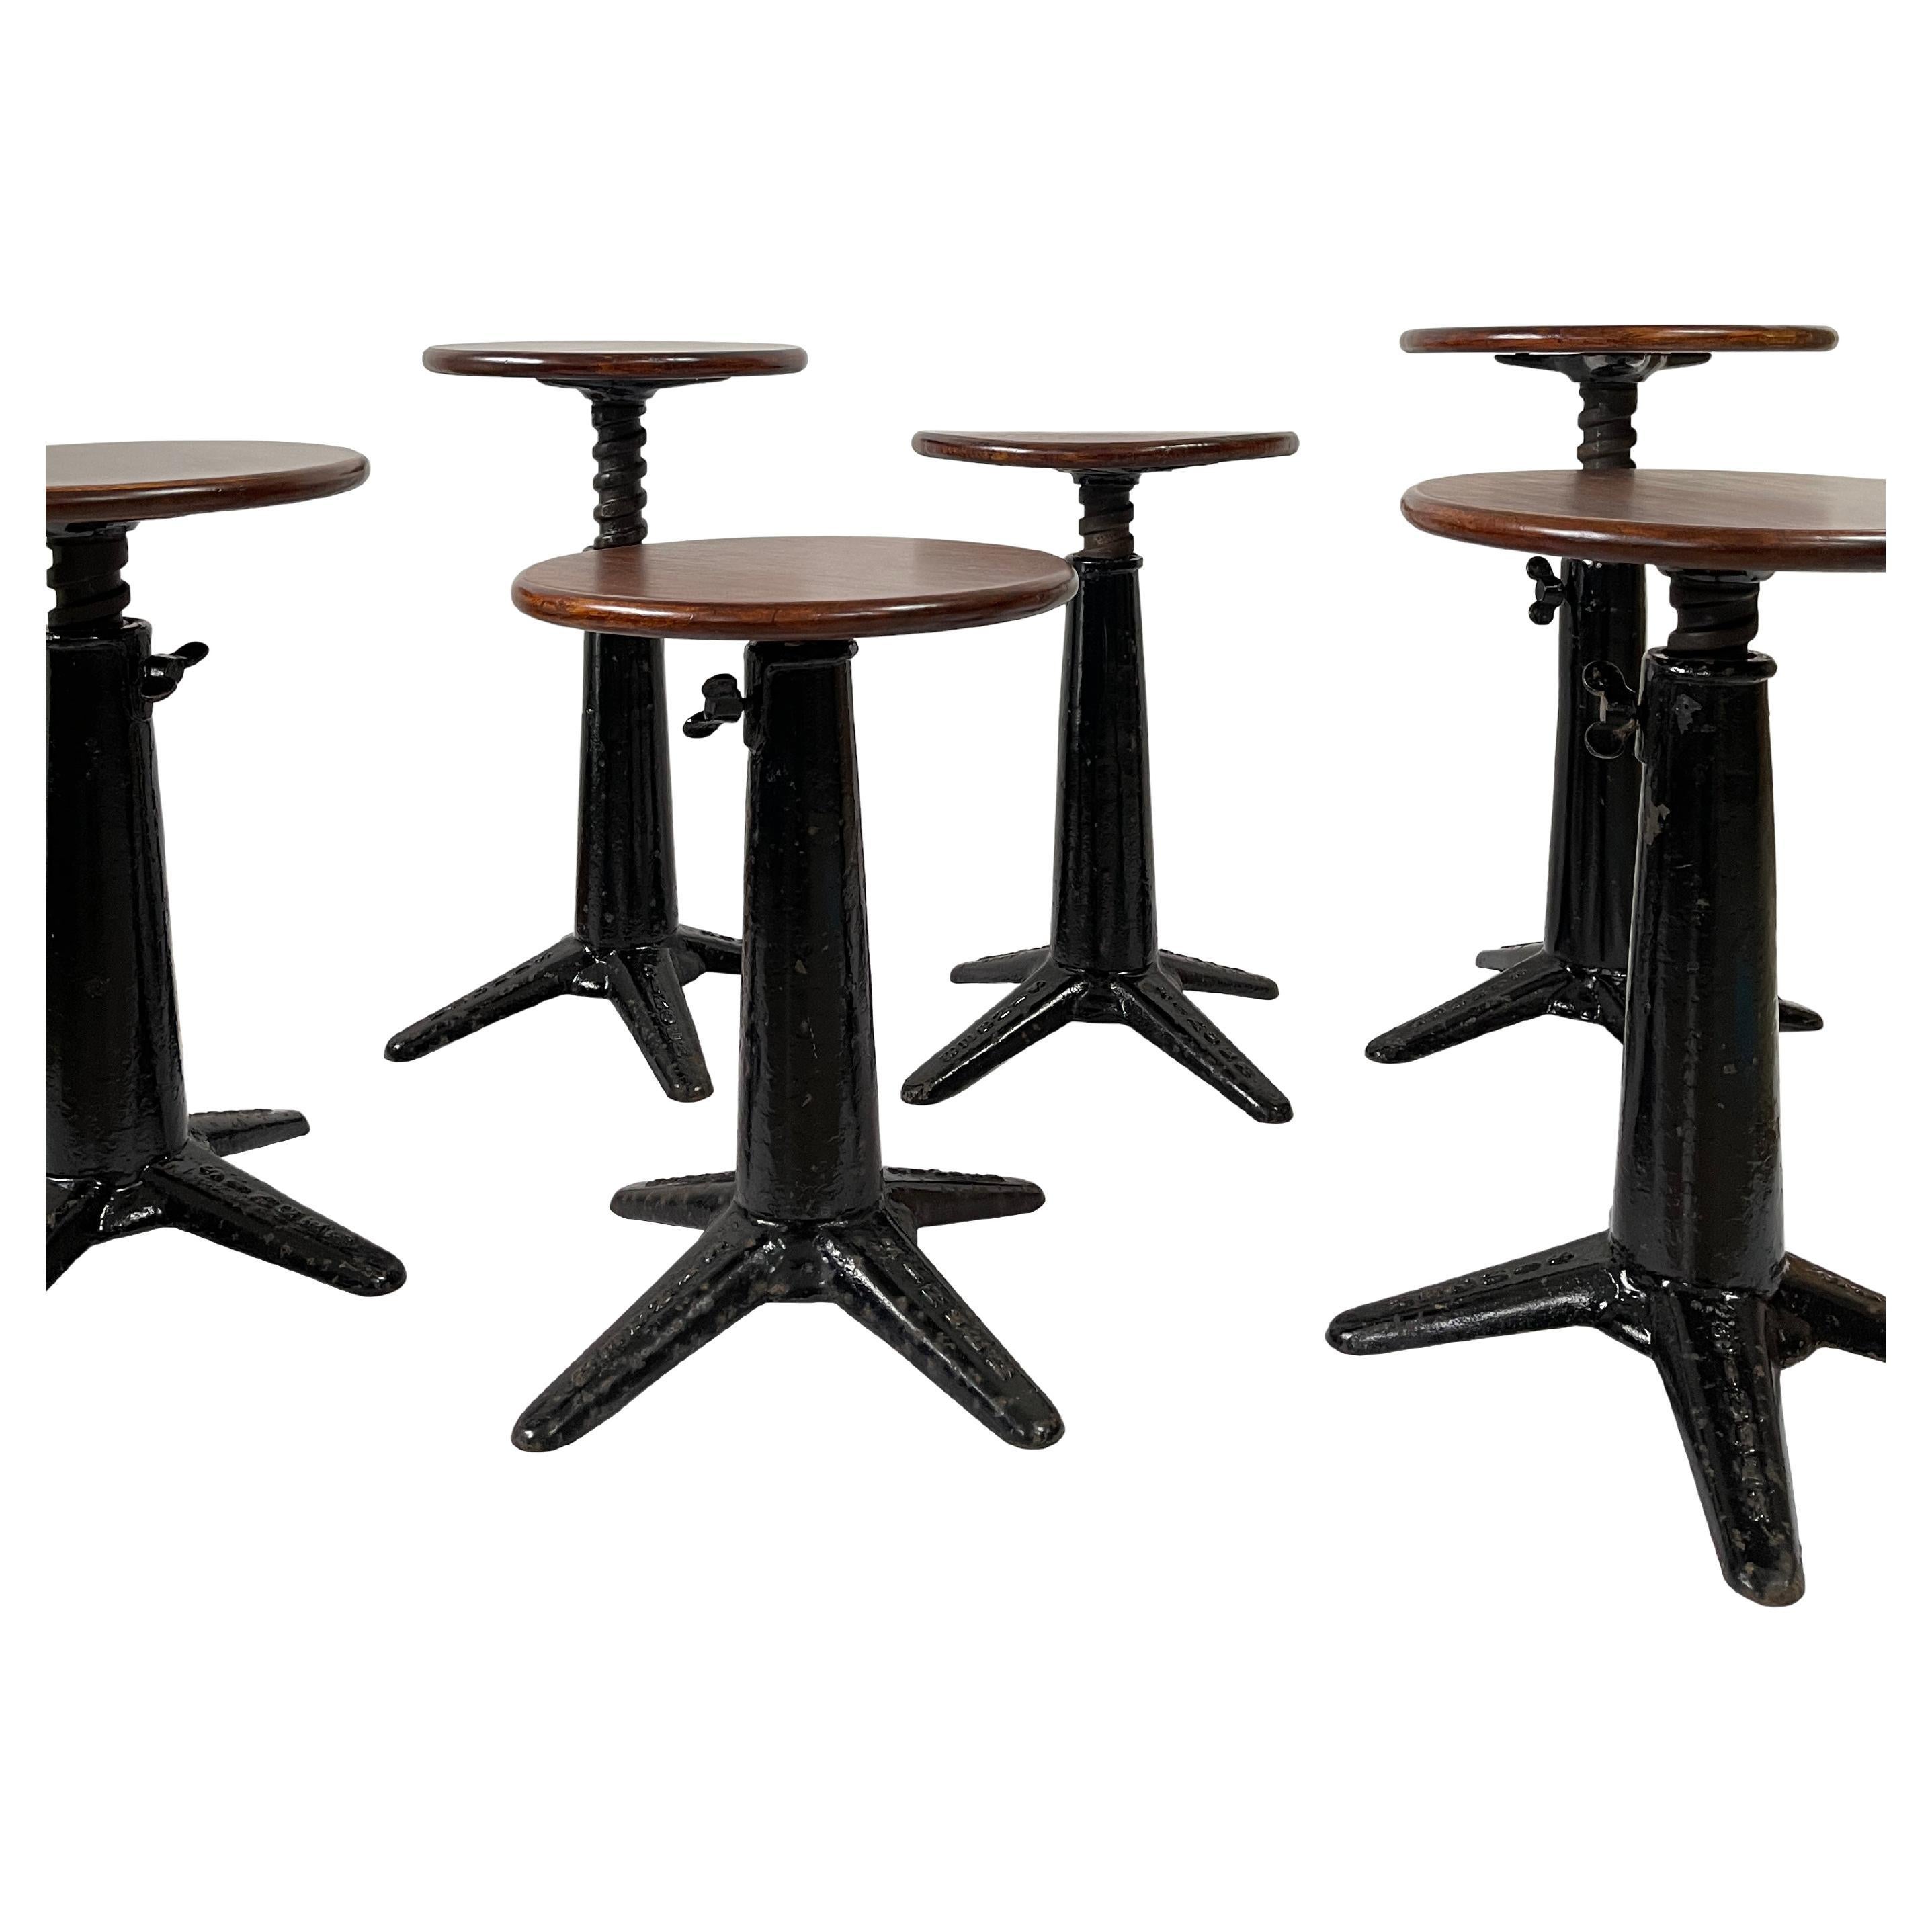 - A fabulous run of 5 original Singer sewing stools, English circa 1930.
- Heavy industrial construction featuring die-cast iron bases that hold a swivel mechanism to adjust the seating height, all with original wing nuts.
- Beautiful condition,